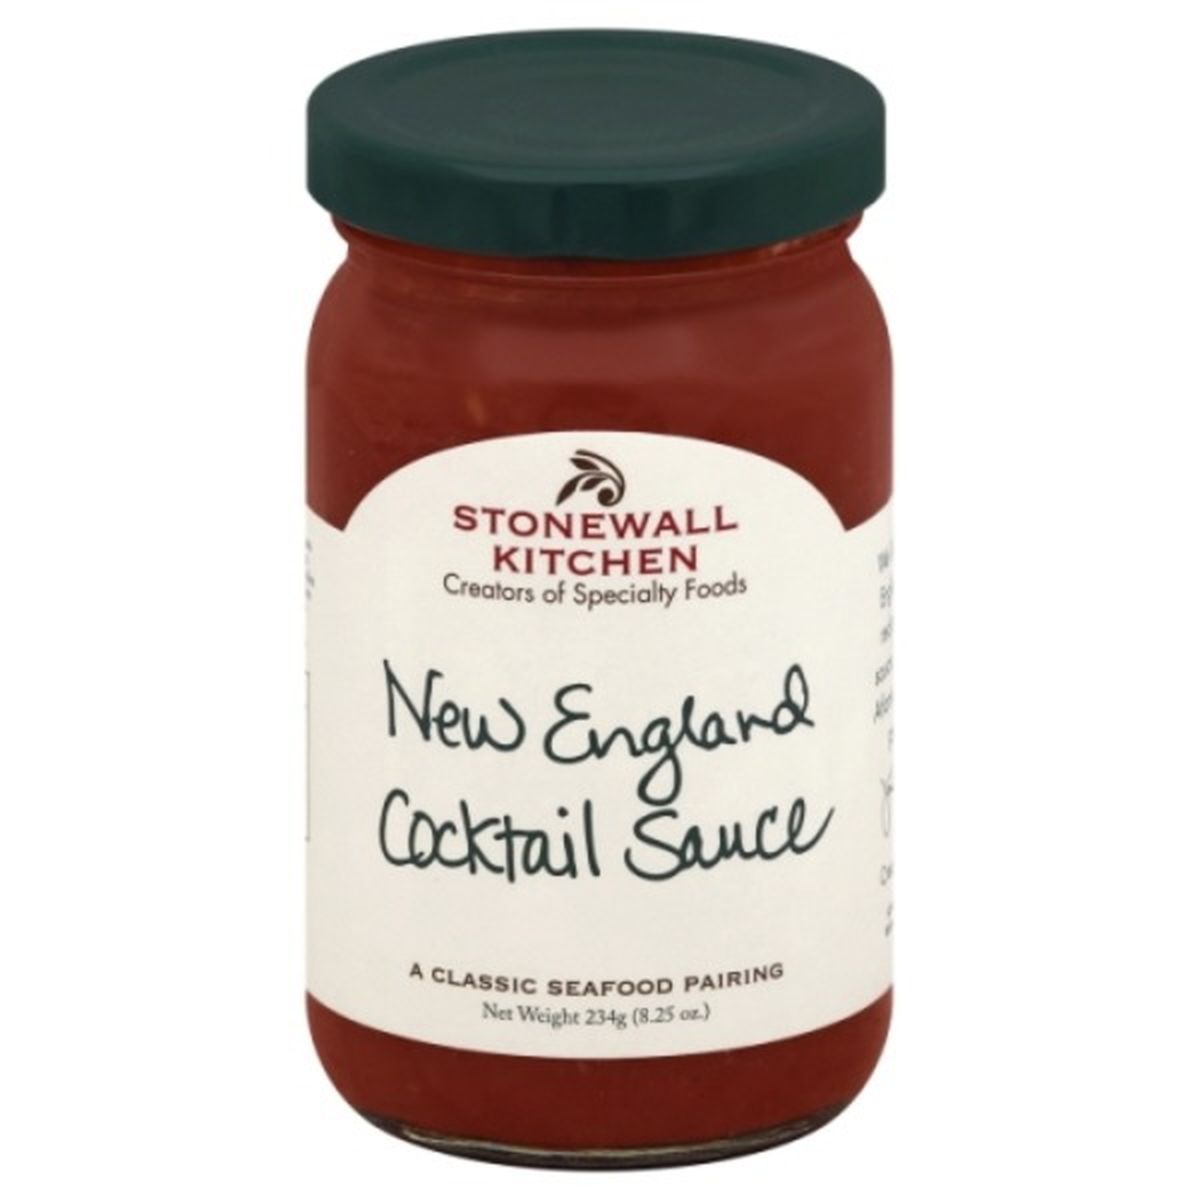 Calories in Stonewall Kitchen Cocktail Sauce, New England